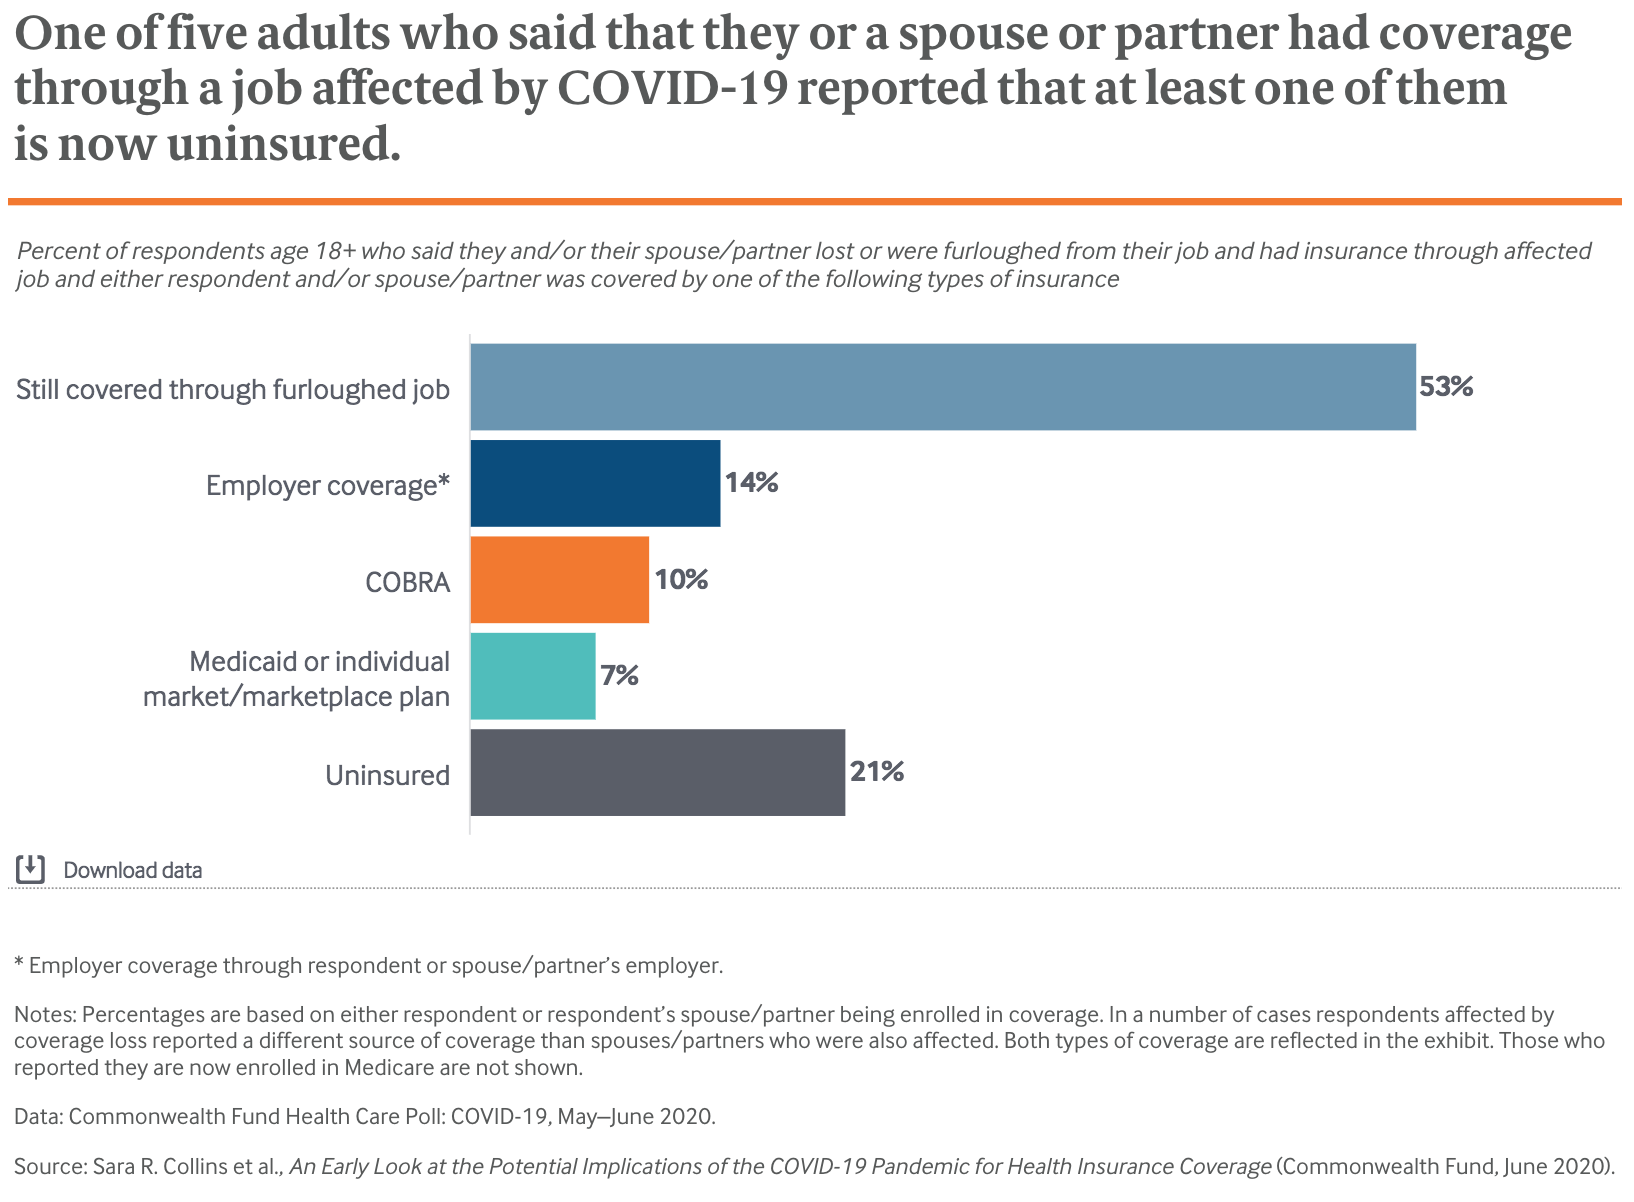 One of five adults who said that they or a spouse or partner had coverage through a job affected by COVID-19 reported that at least one of them  is now uninsured.